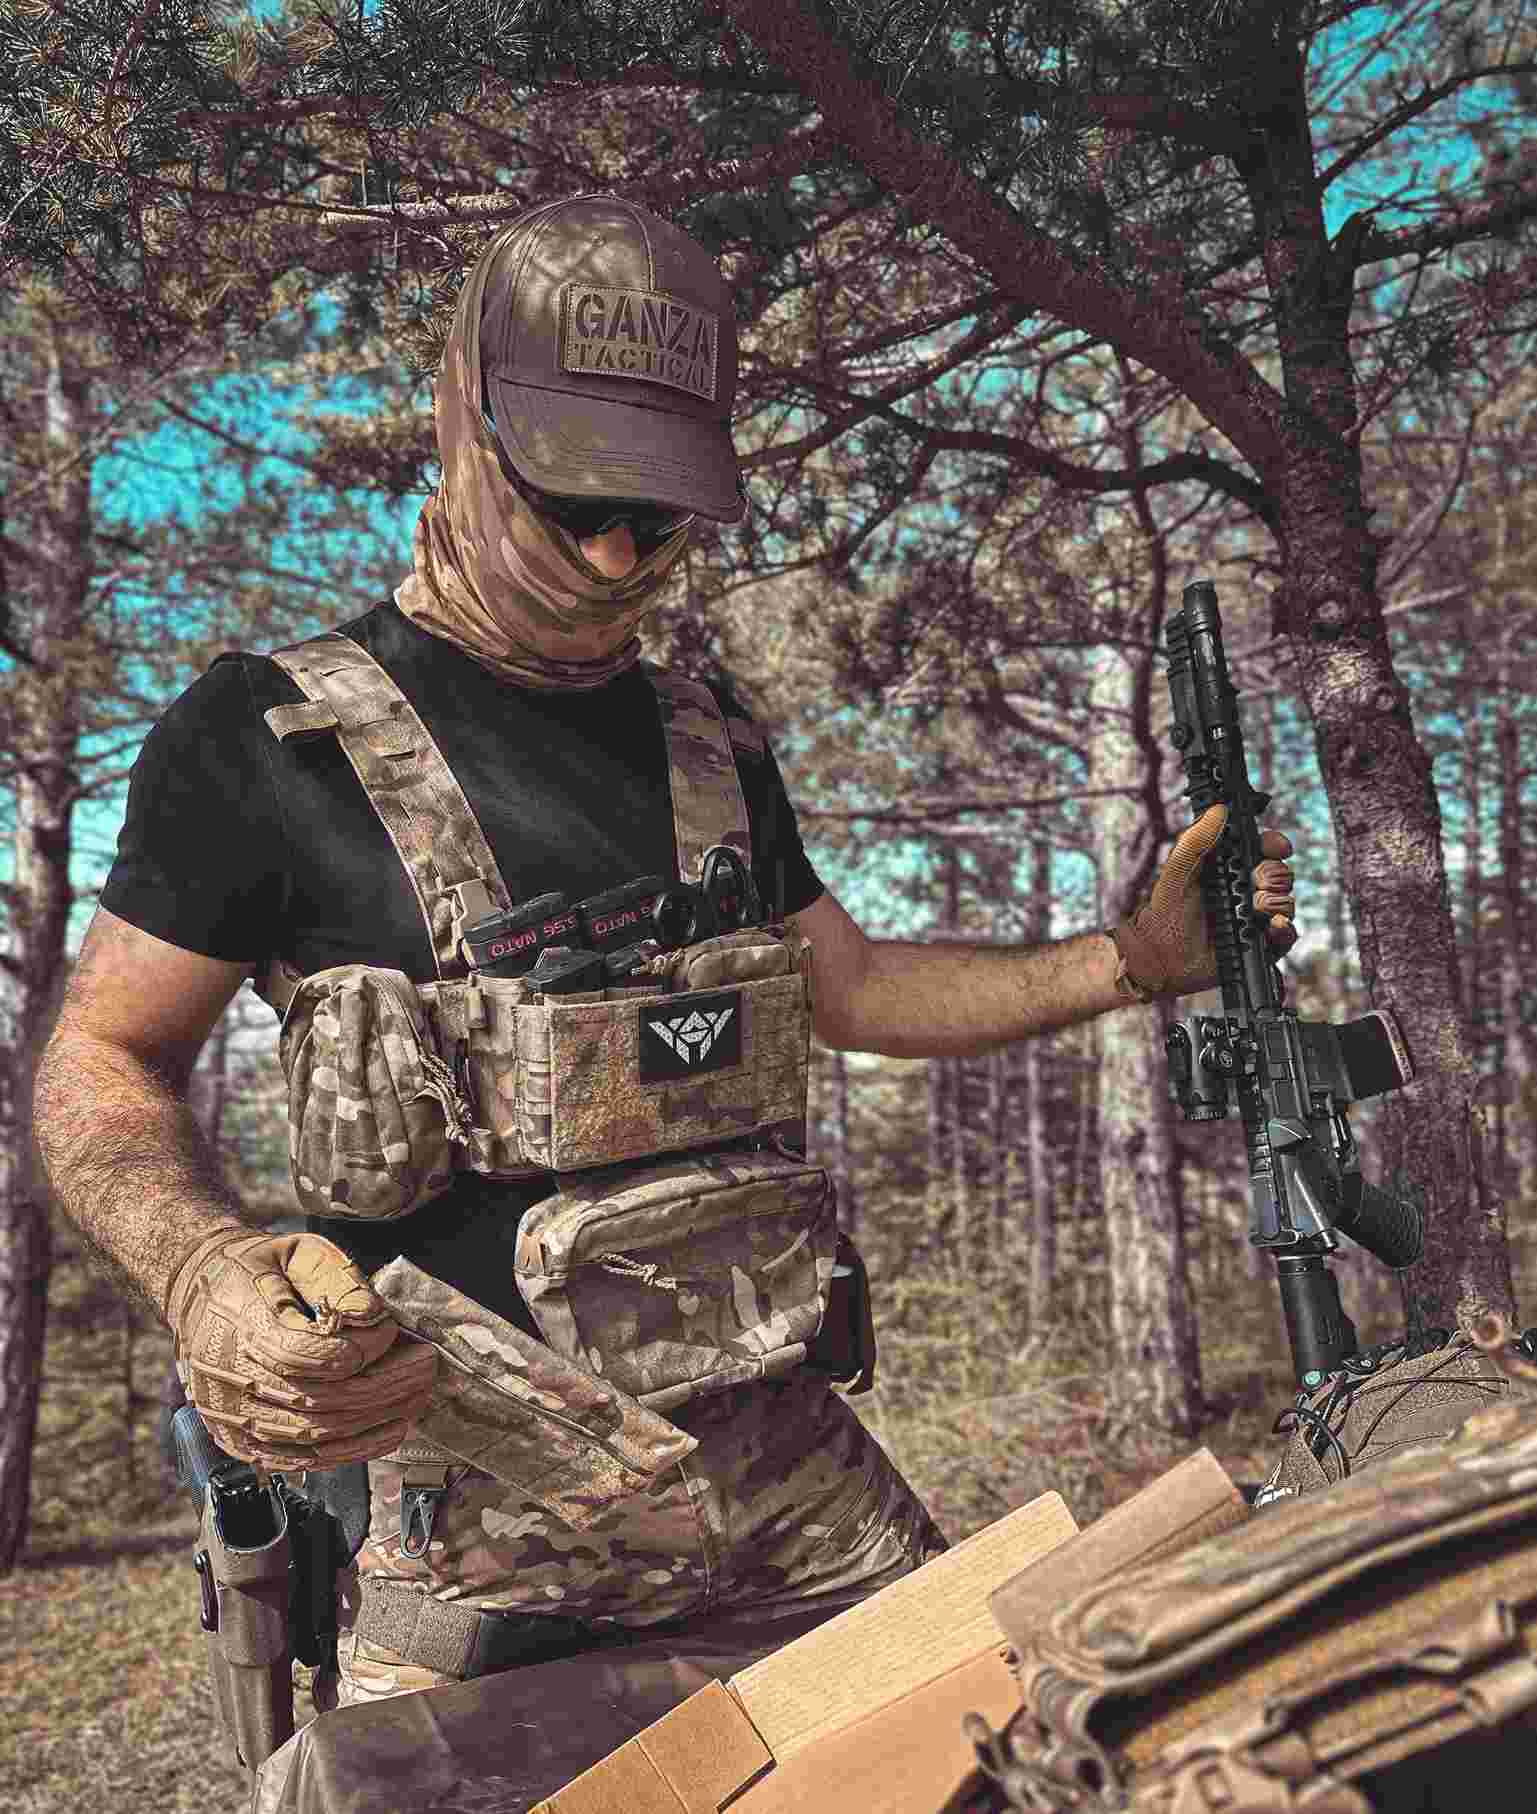 Zero to one: How did the tactical vest you use get into your hands?